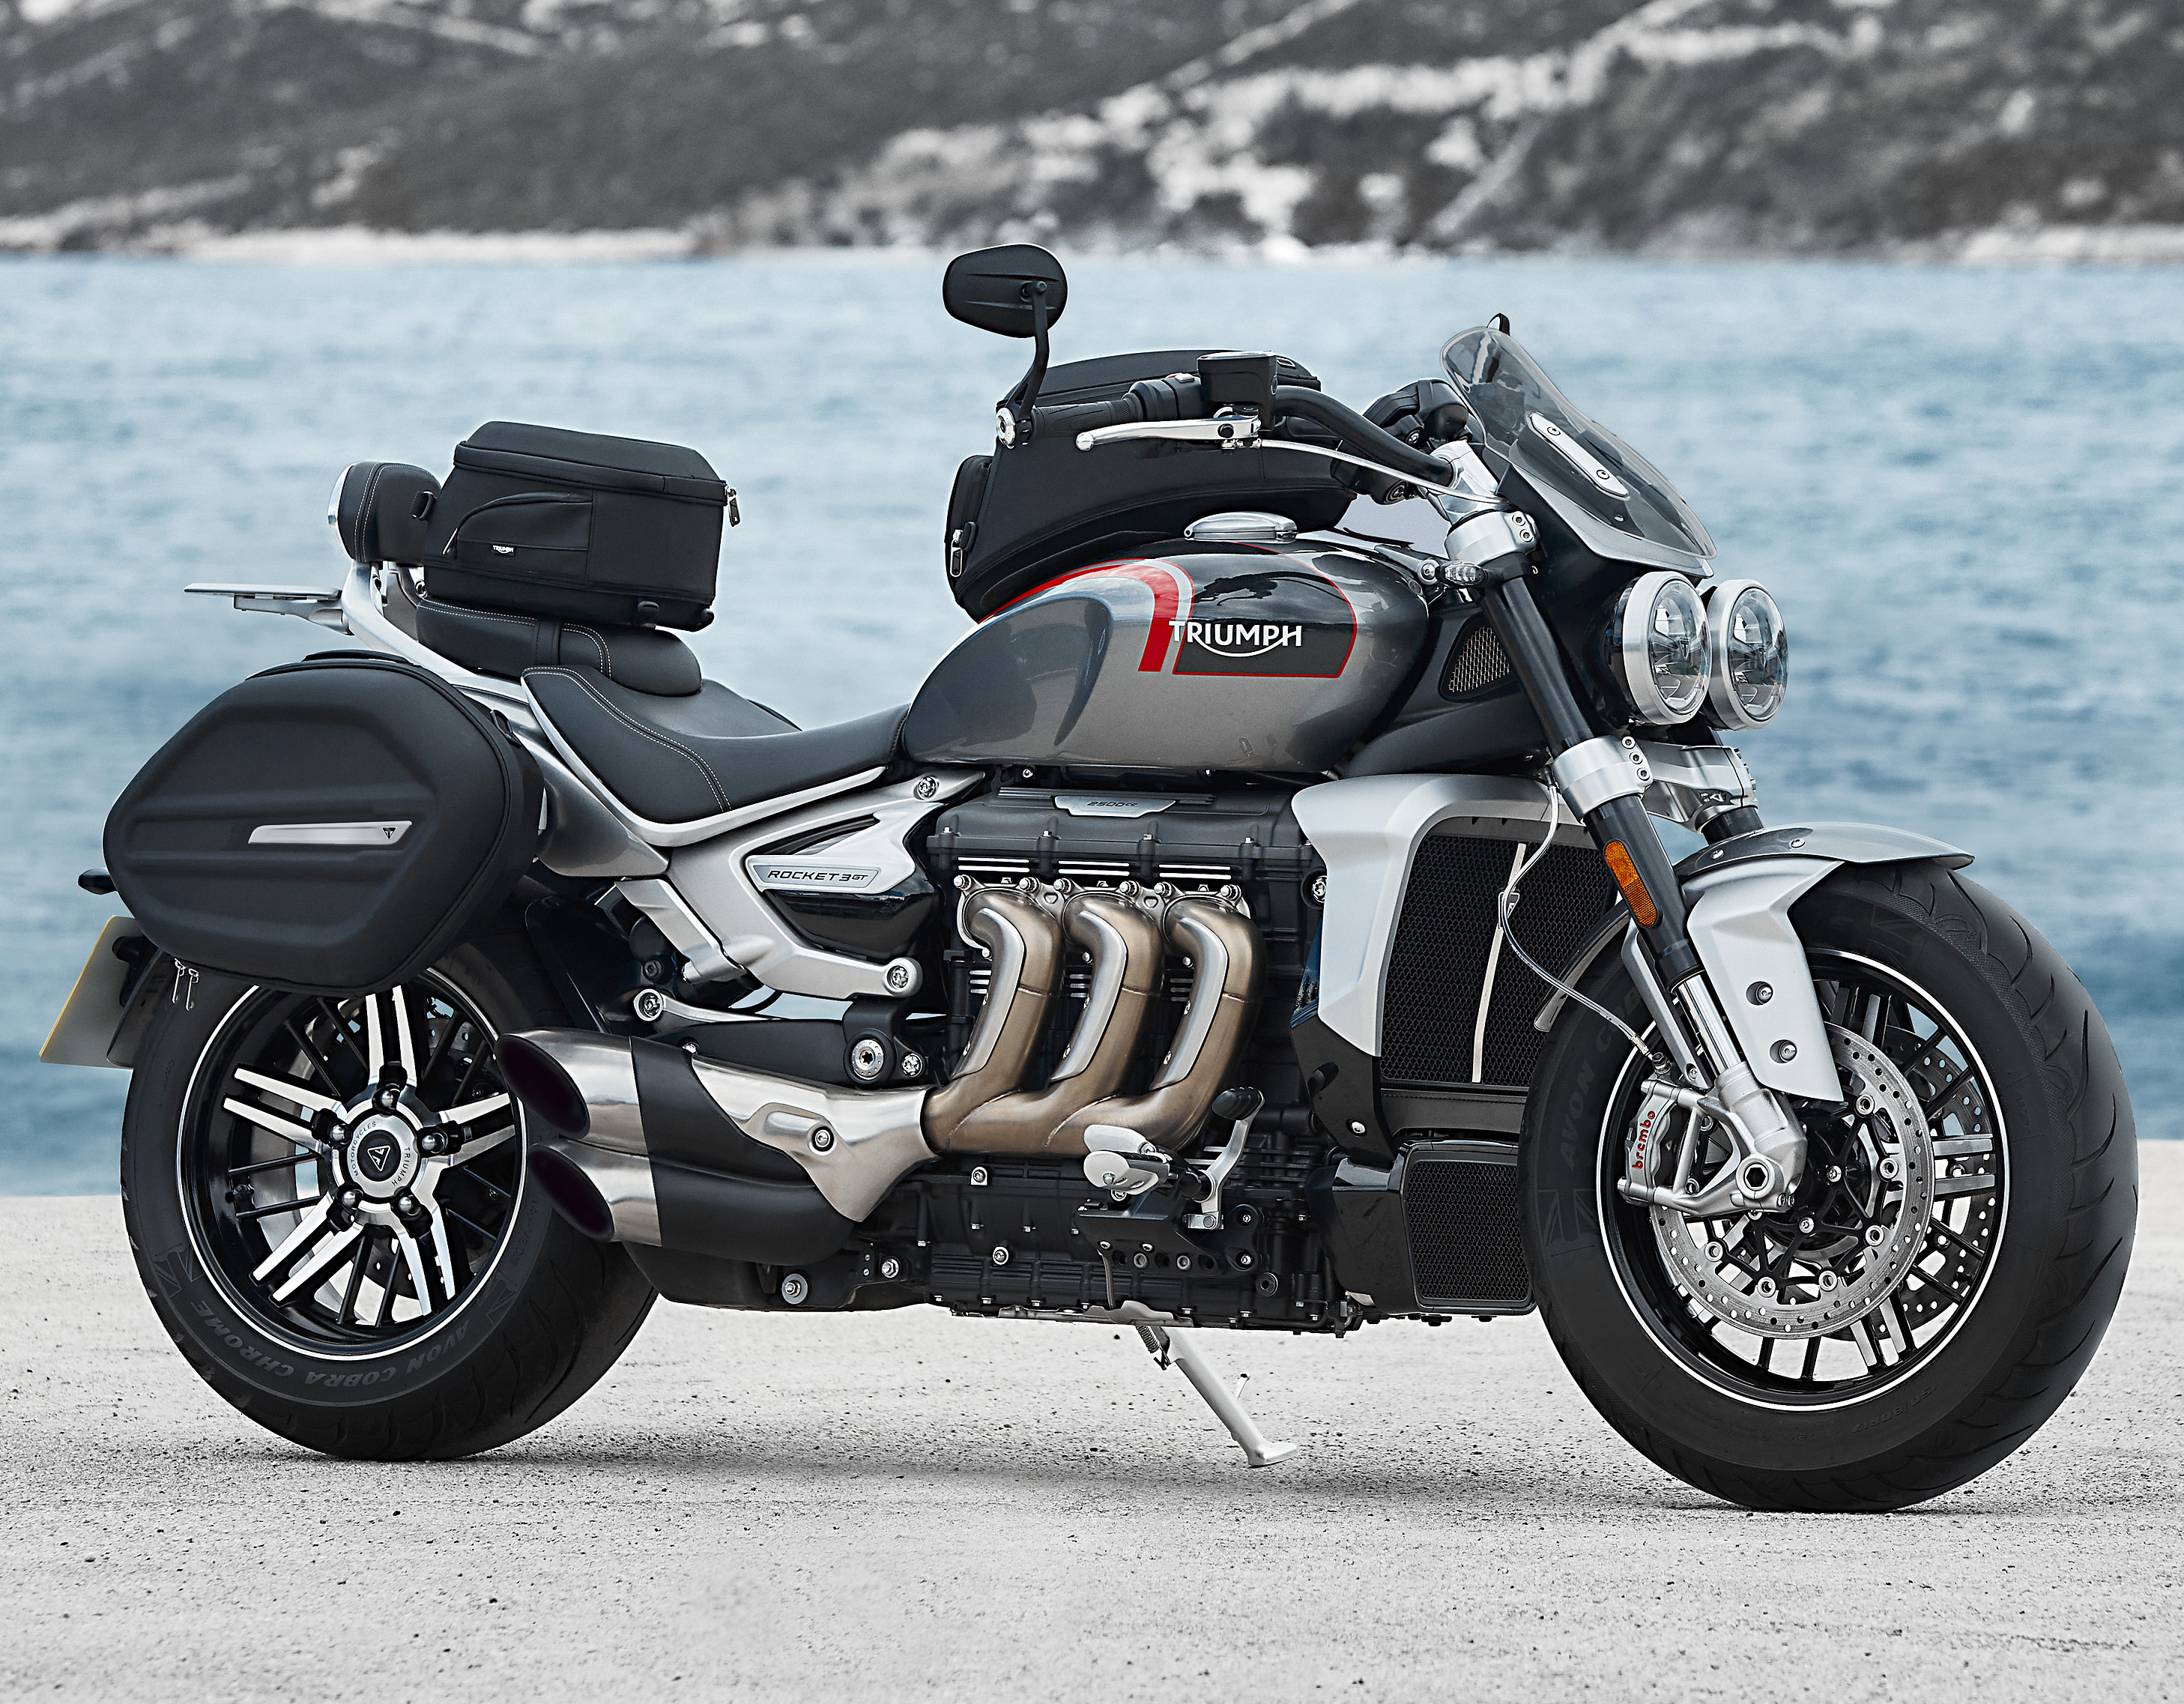 2020 Triumph Rocket 3 R And Rocket 3 Gt Launched In Malaysia 2500 Cc Three Cylinder From